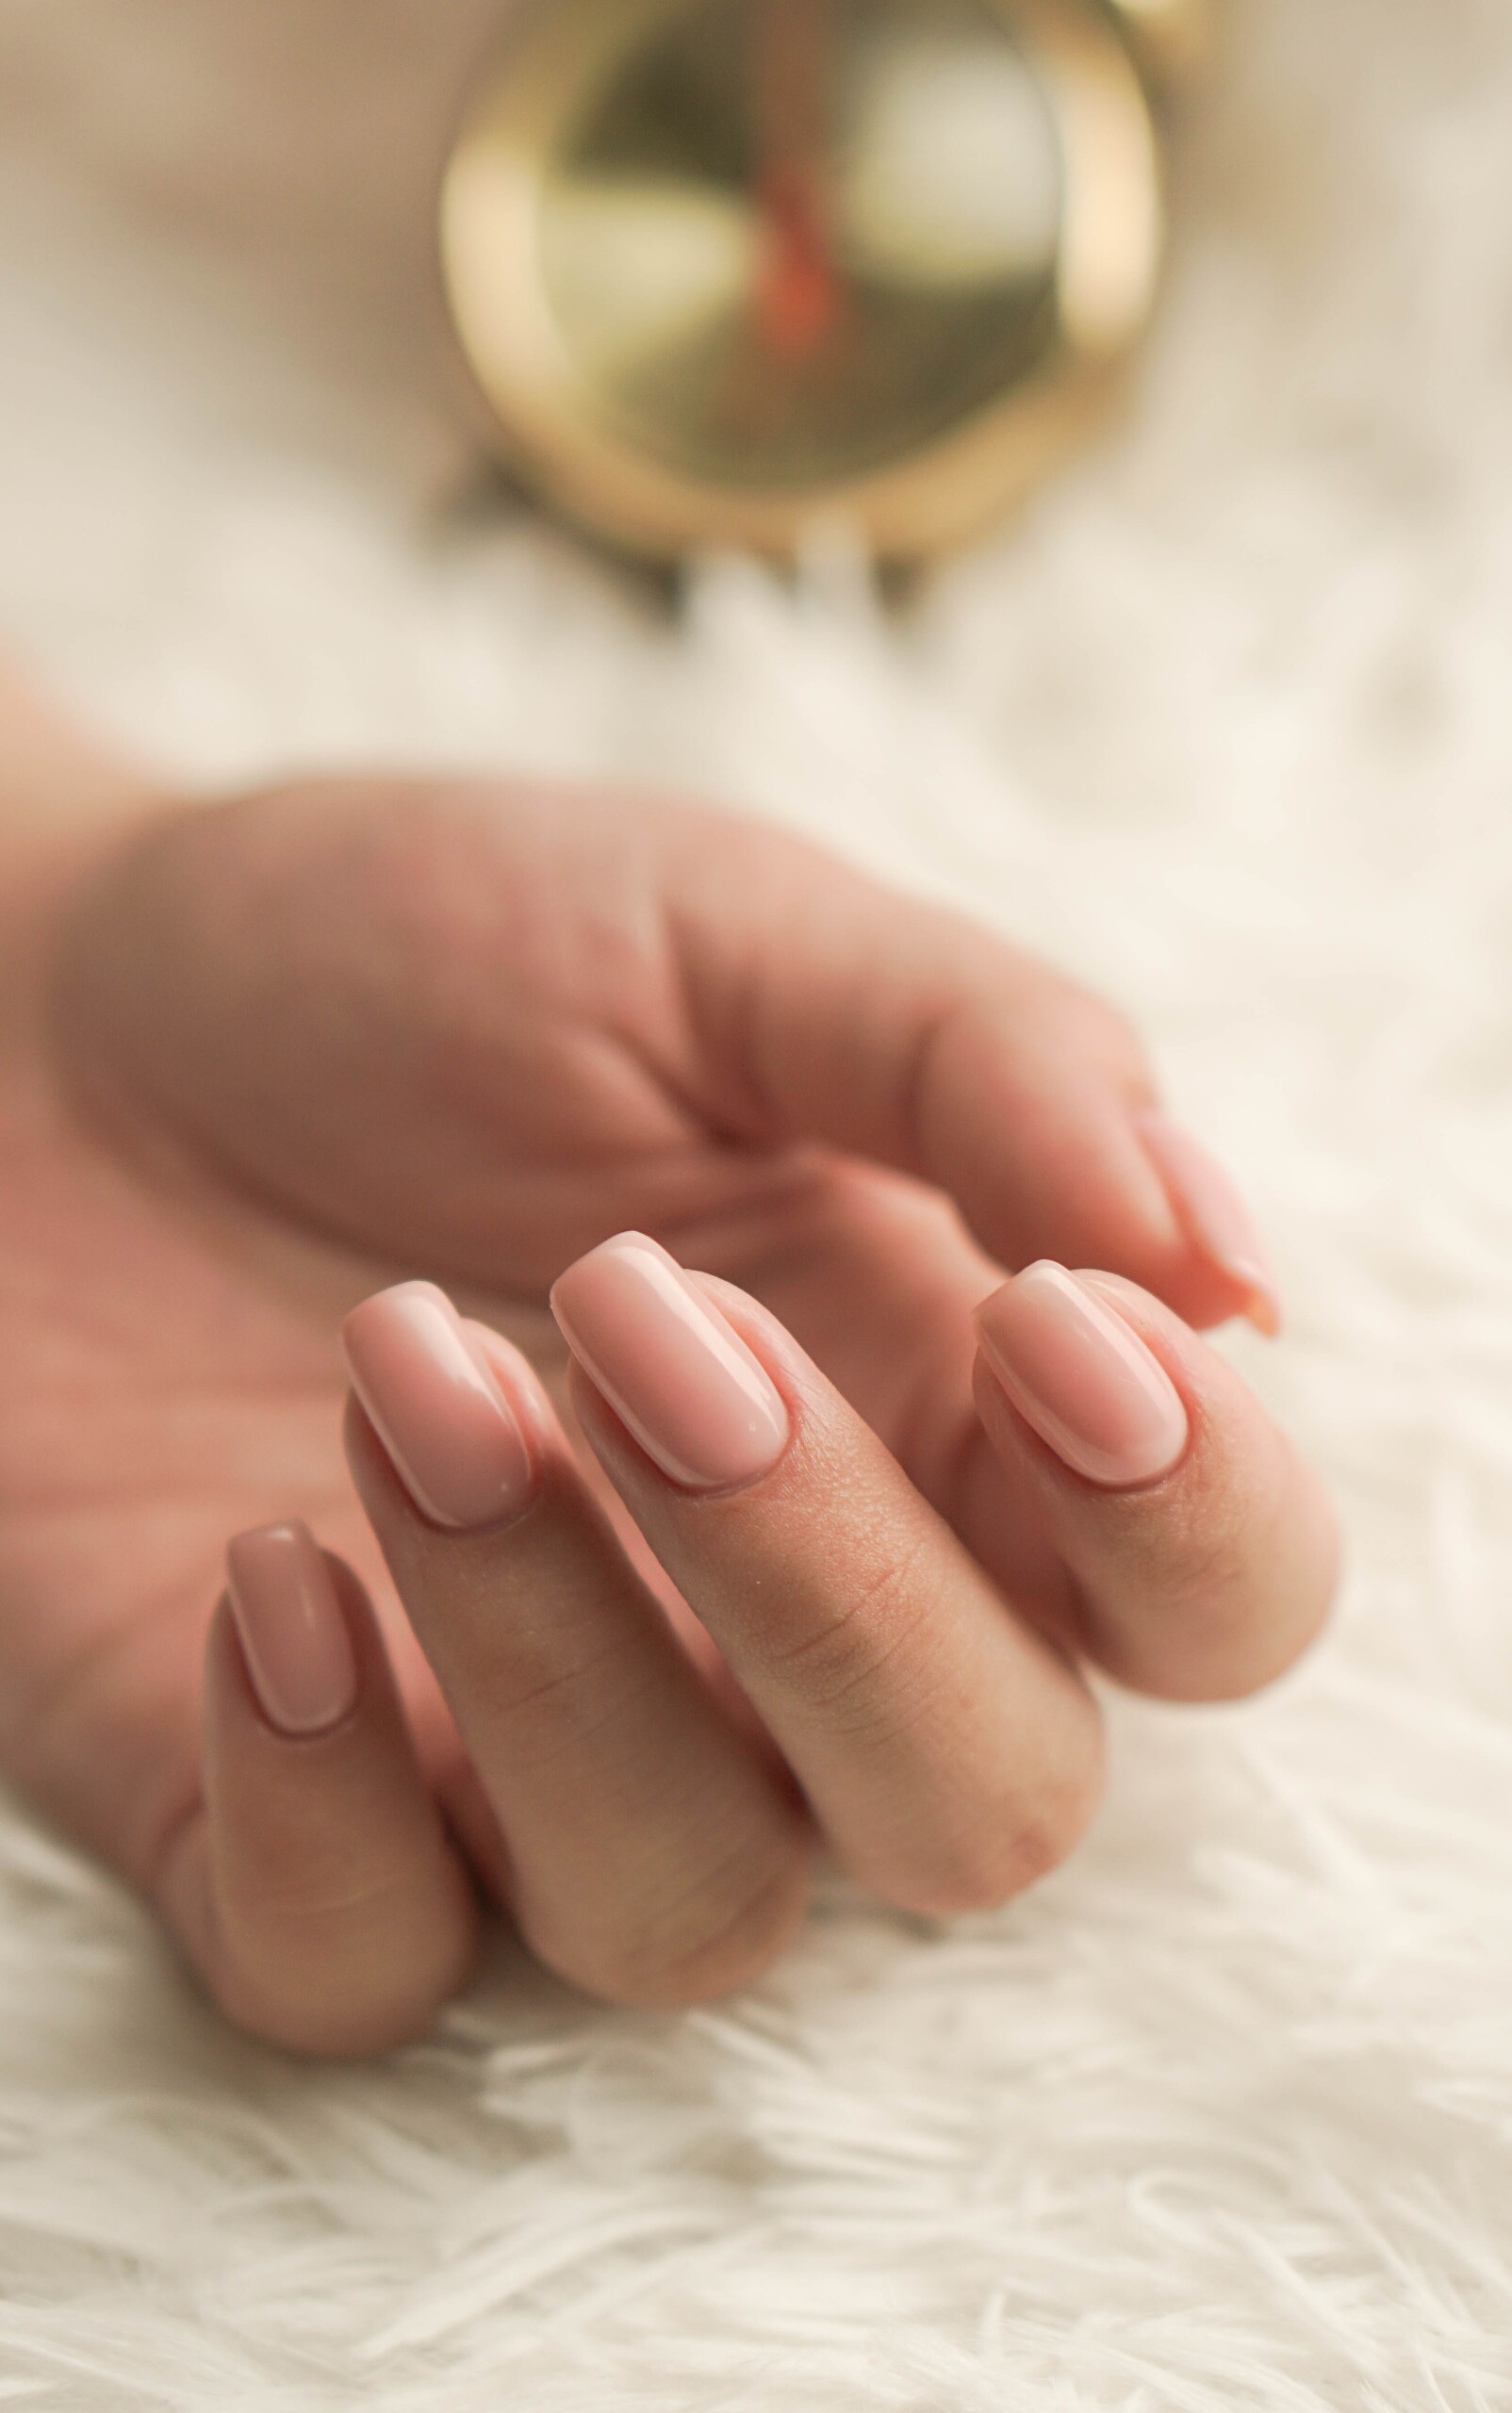 Researchers Say This Simple Hack Could Stop Your Nail-Biting Habit